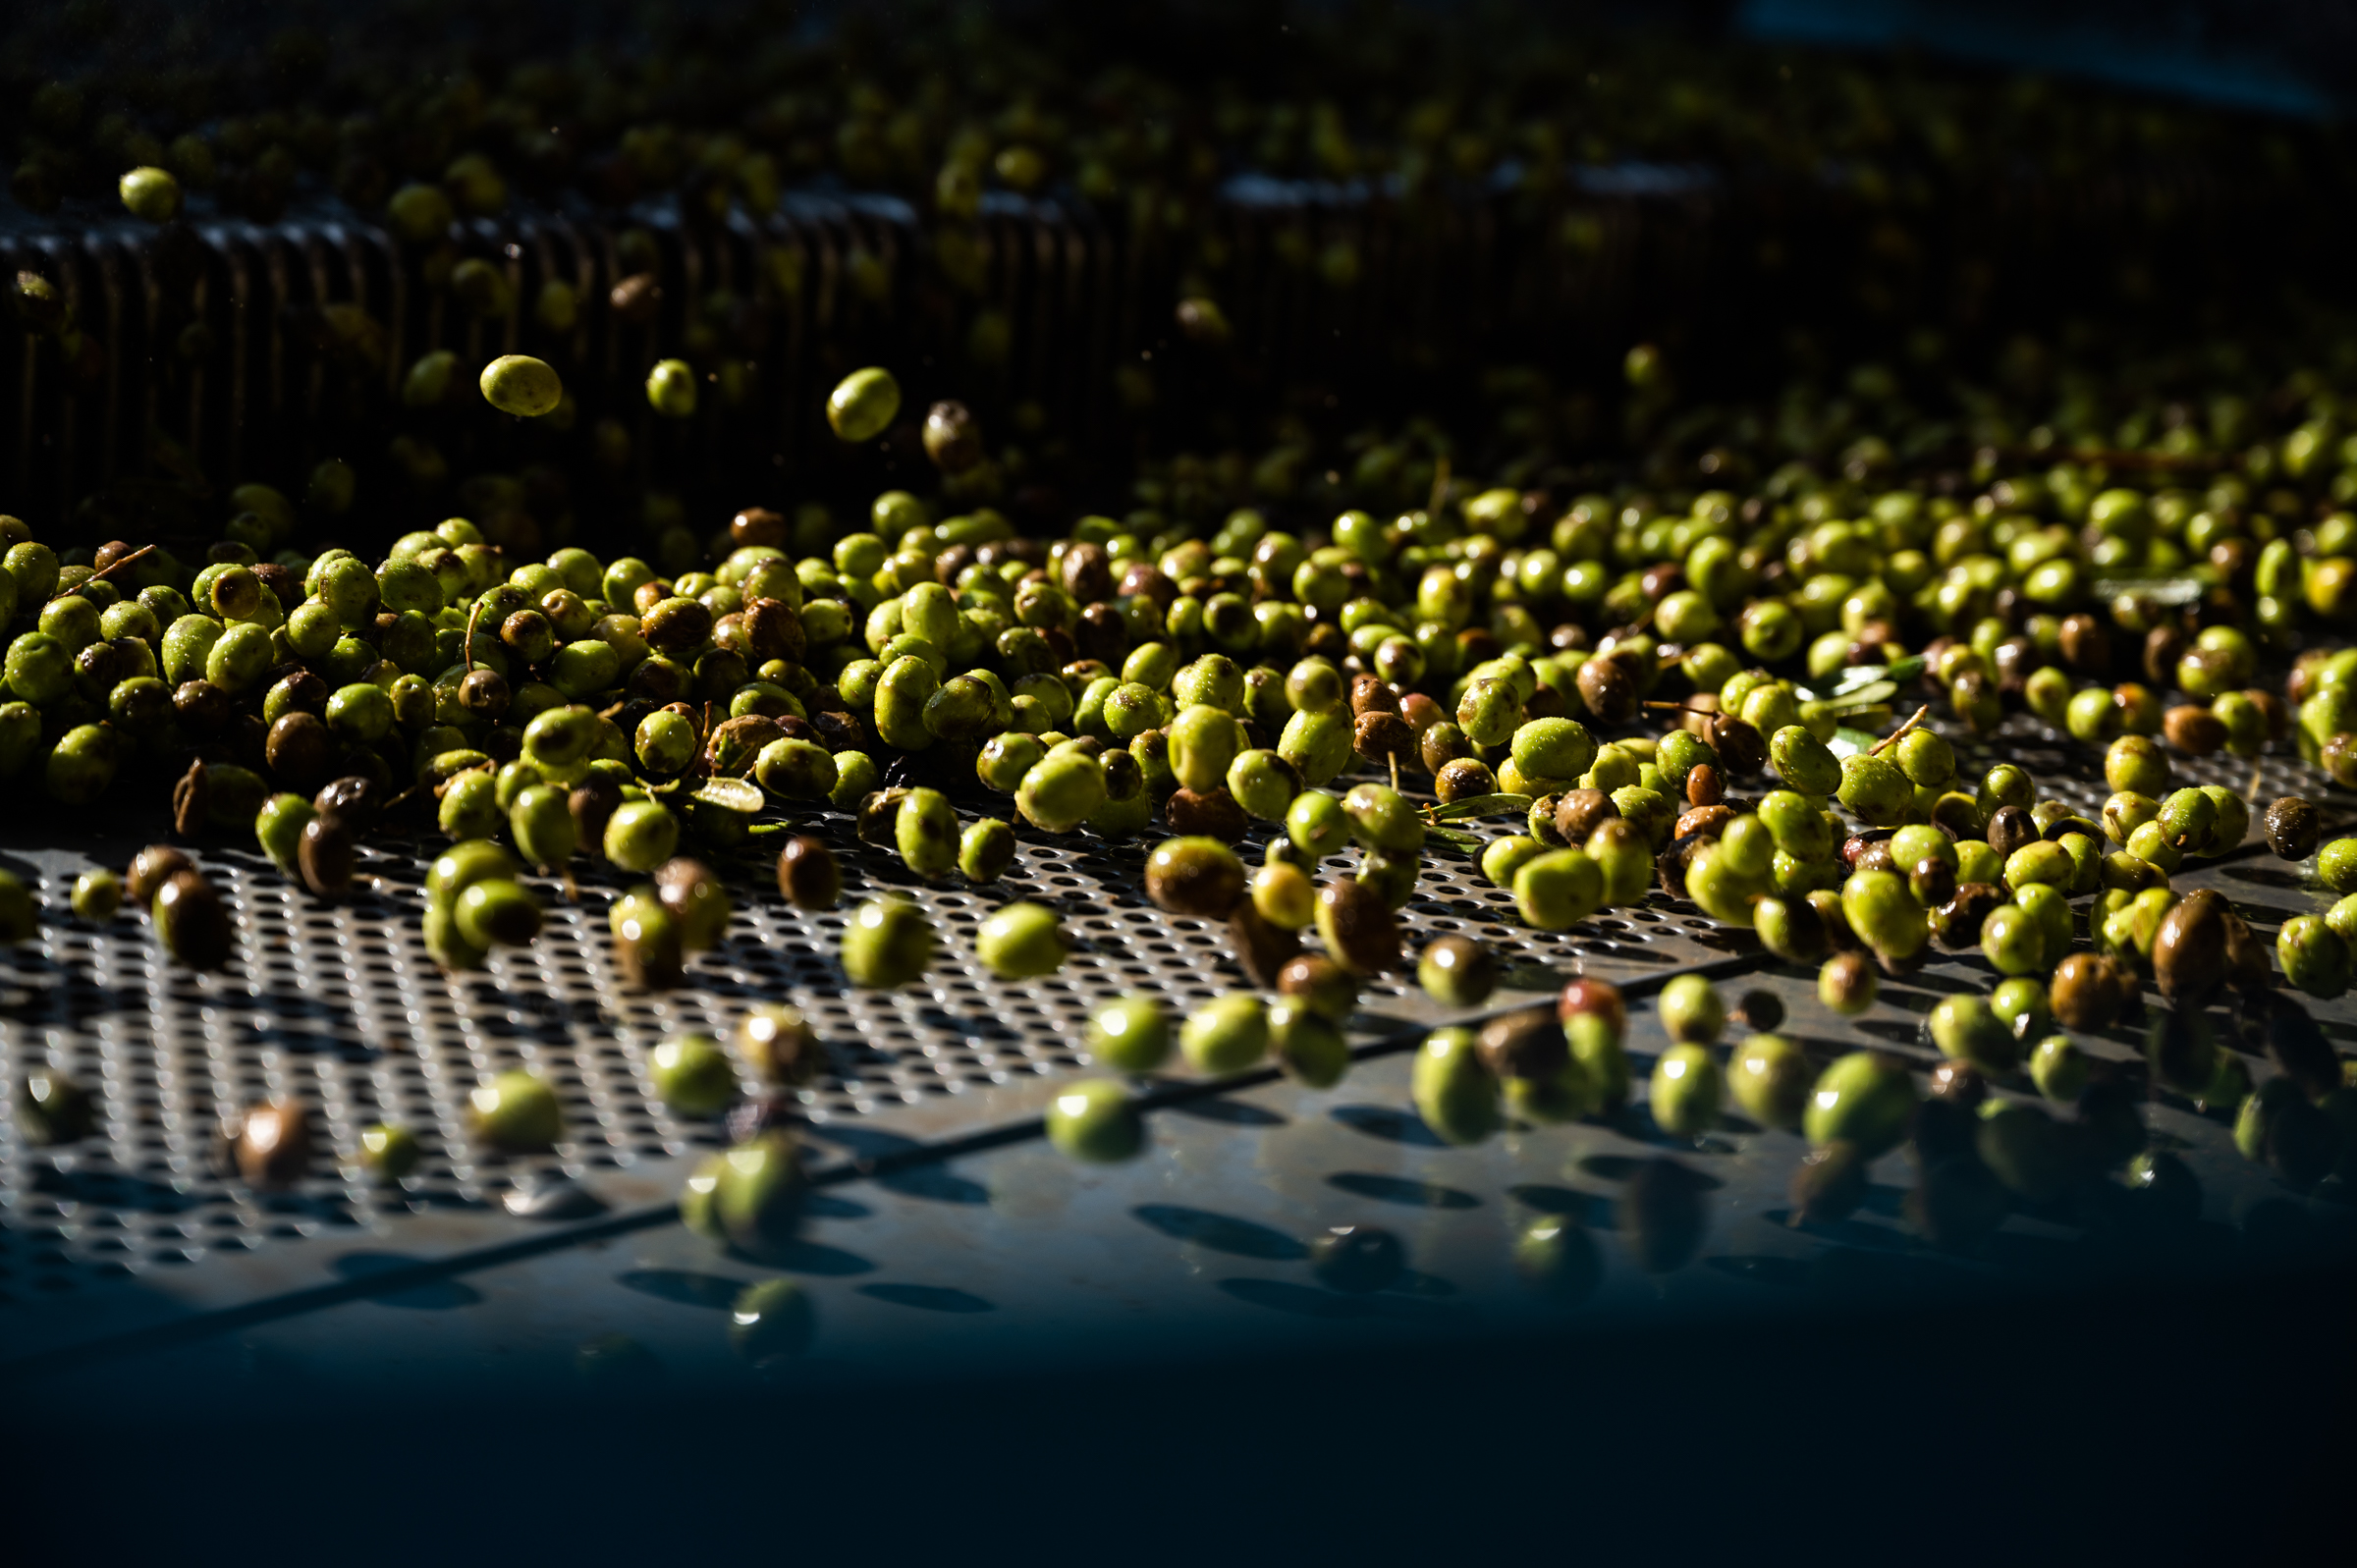 Olives are tumbled and rinsed with water